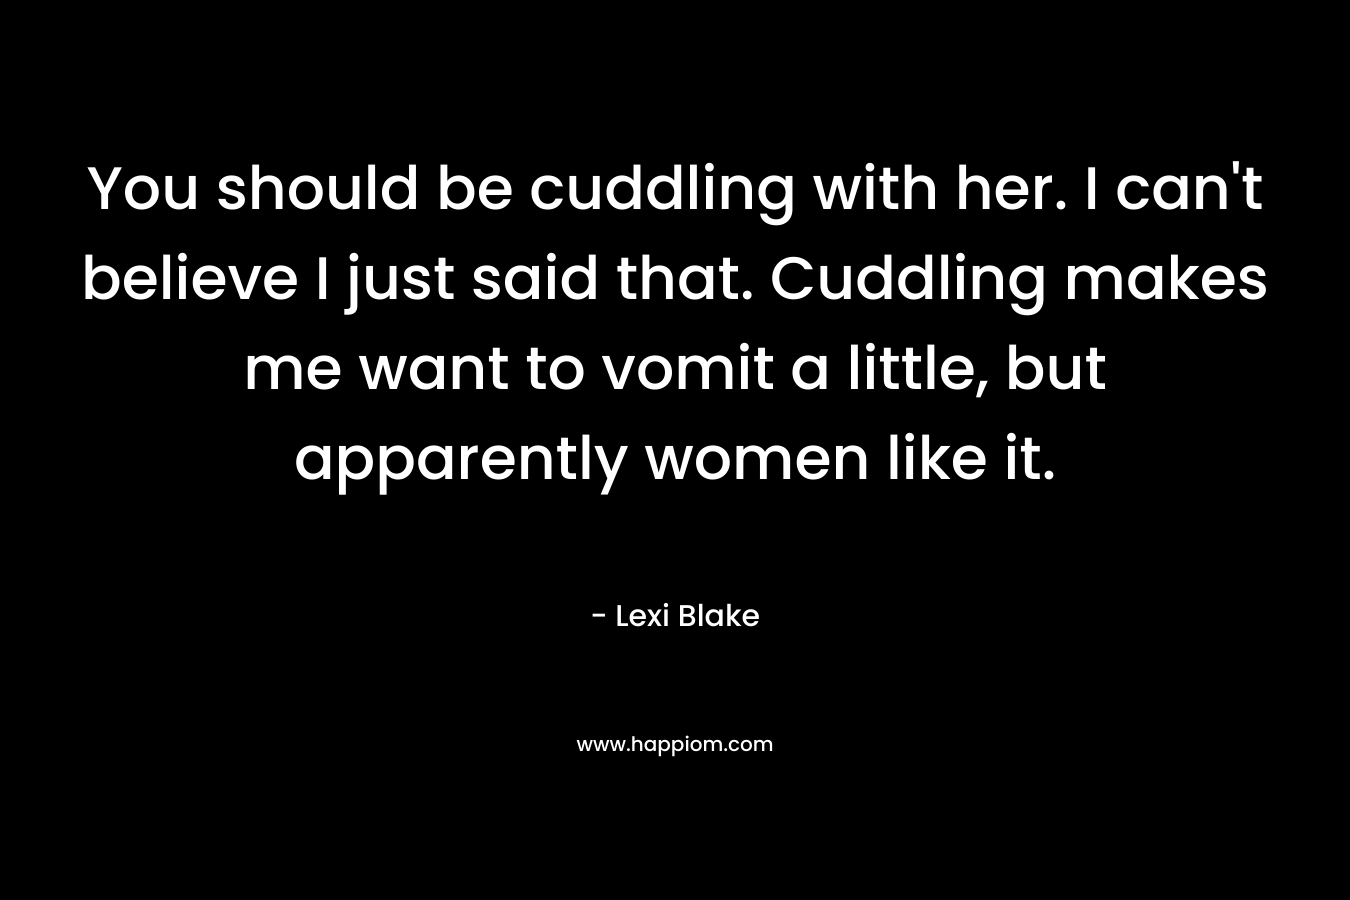 You should be cuddling with her. I can't believe I just said that. Cuddling makes me want to vomit a little, but apparently women like it.